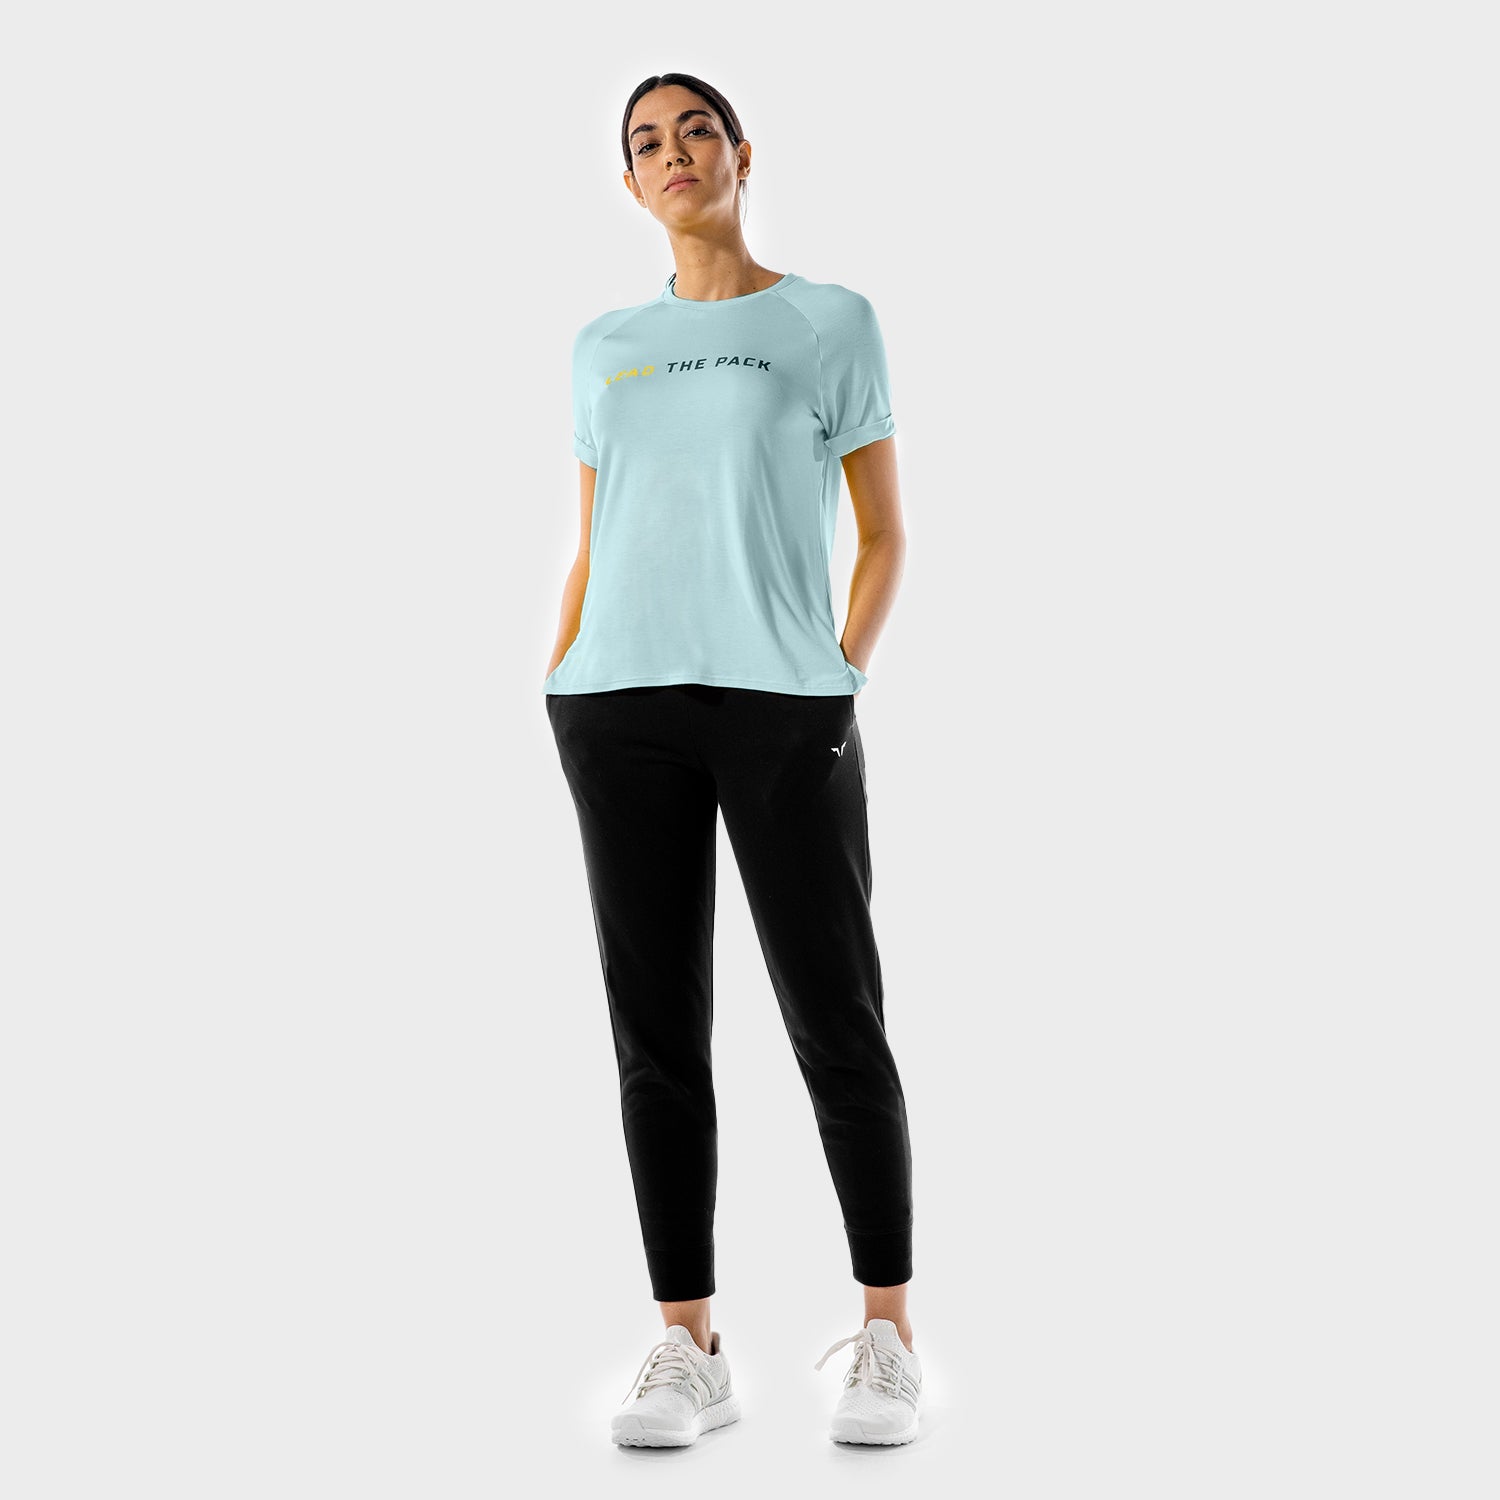 squatwolf-gym-t-shirts-for-women-the-pack-tee-blue-workout-clothes